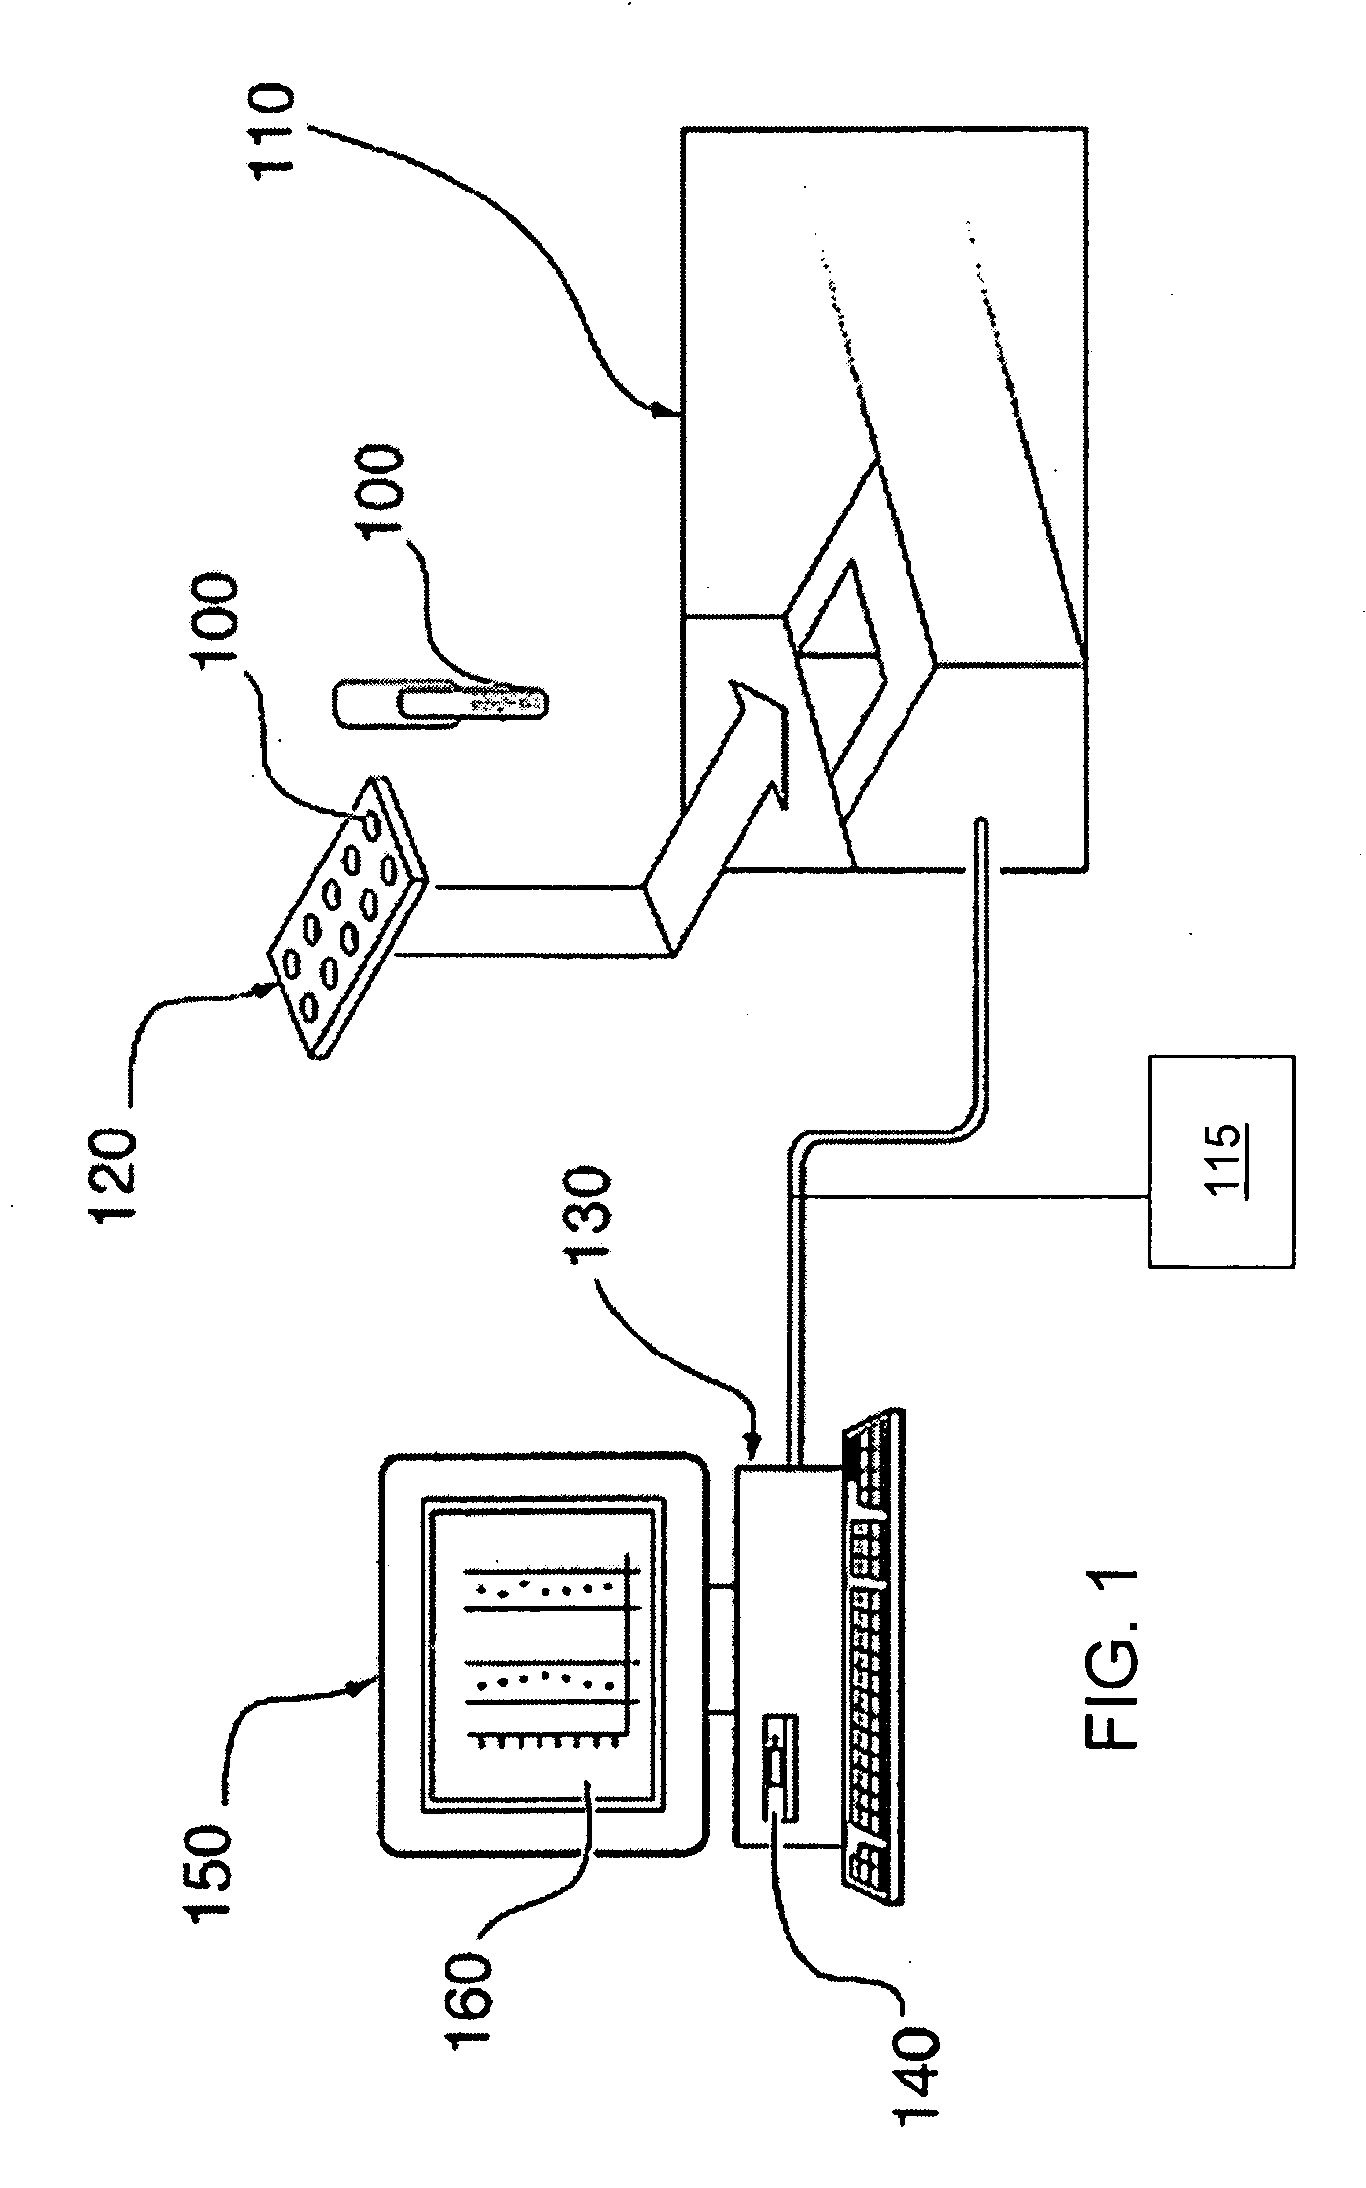 System and Method for Analyzing Metabolomic Data